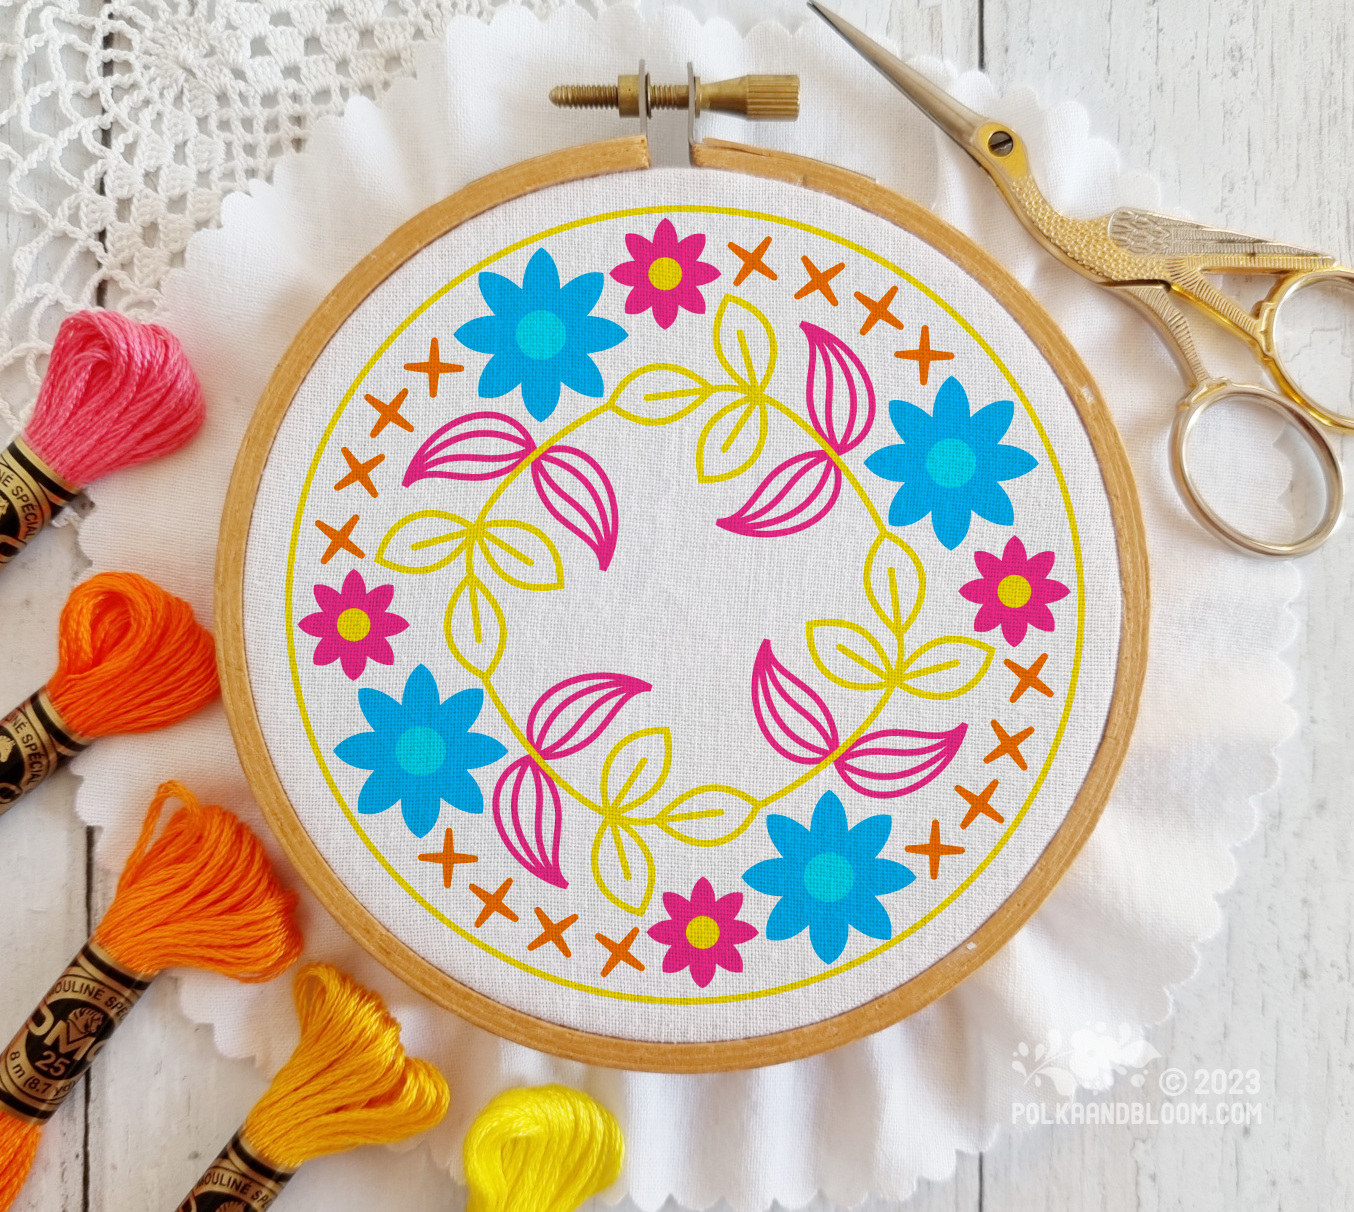 Small wooden embroidery hoop seen from above. There is white fabric in the hoop and the image is overlaid with a line drawing of blue flowers with pink and yellow leaves.